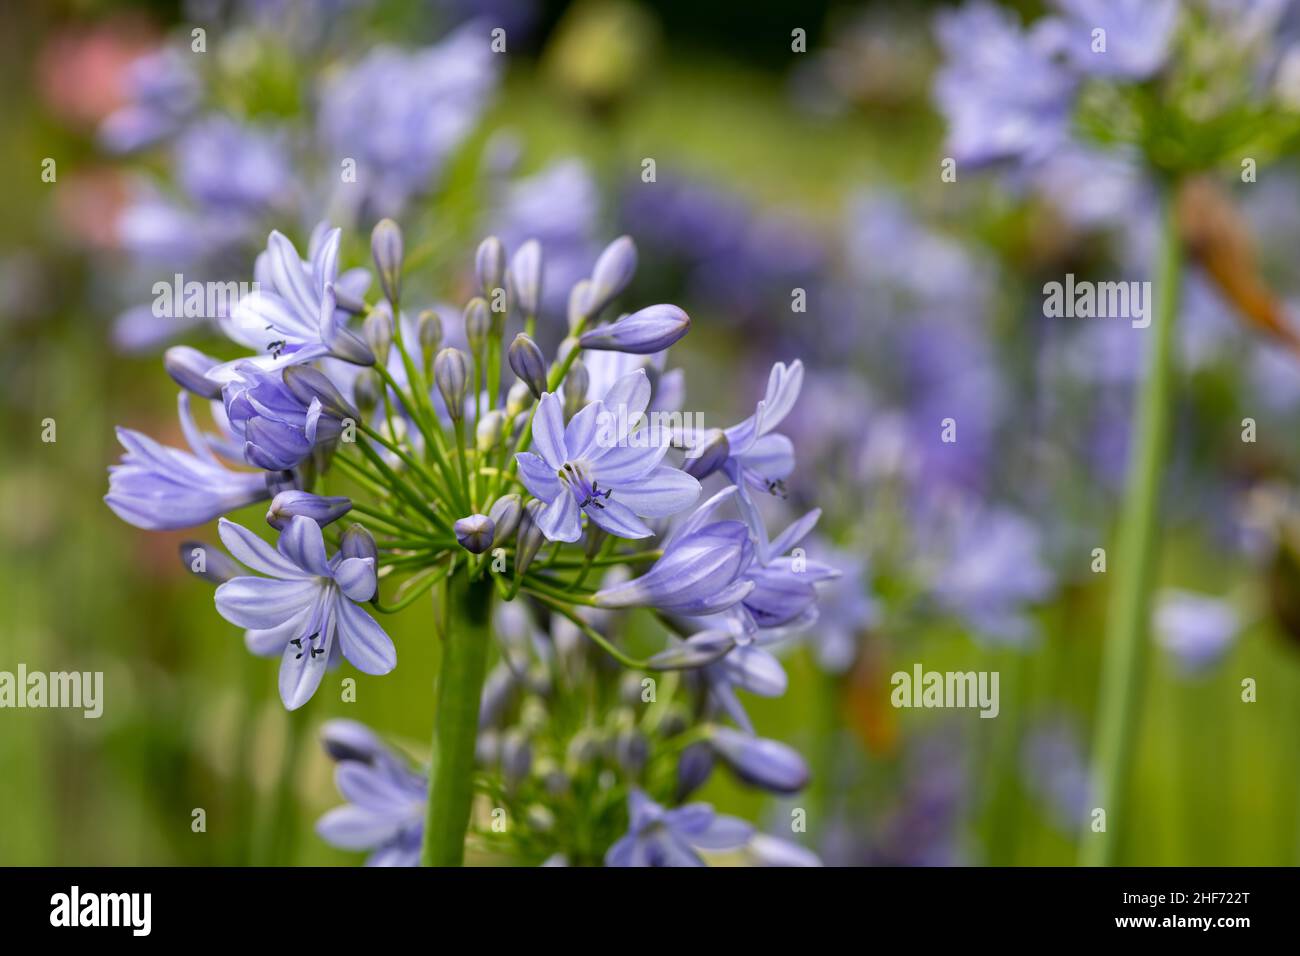 Close up of common agapanthus (agapanthus praecox) flowers in bloom Stock Photo